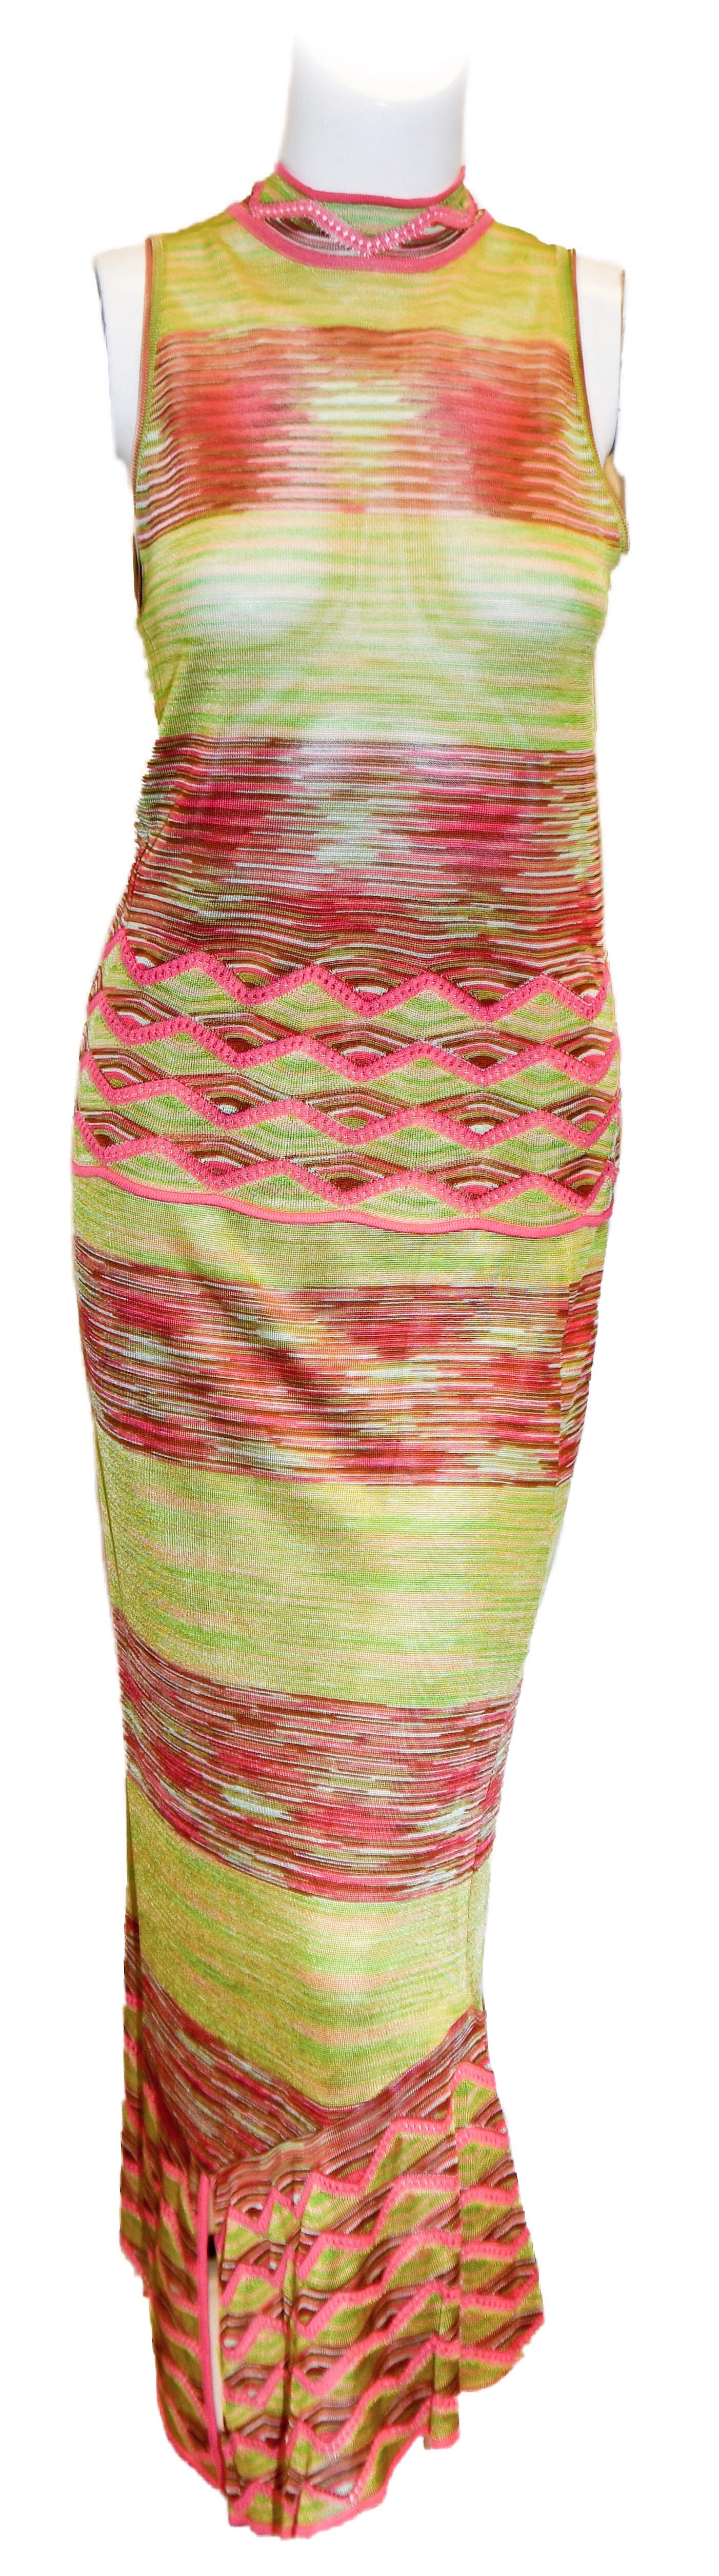 Mis  soni multi colored accentuated in chartruese and pink, 4 piece ensemble includes  a 2 piece Chevron knit 
V-neck cardigan tank top twin set. This flirty set, also includes a long skirt that is open at front on the hem and, also, a long scarf. 